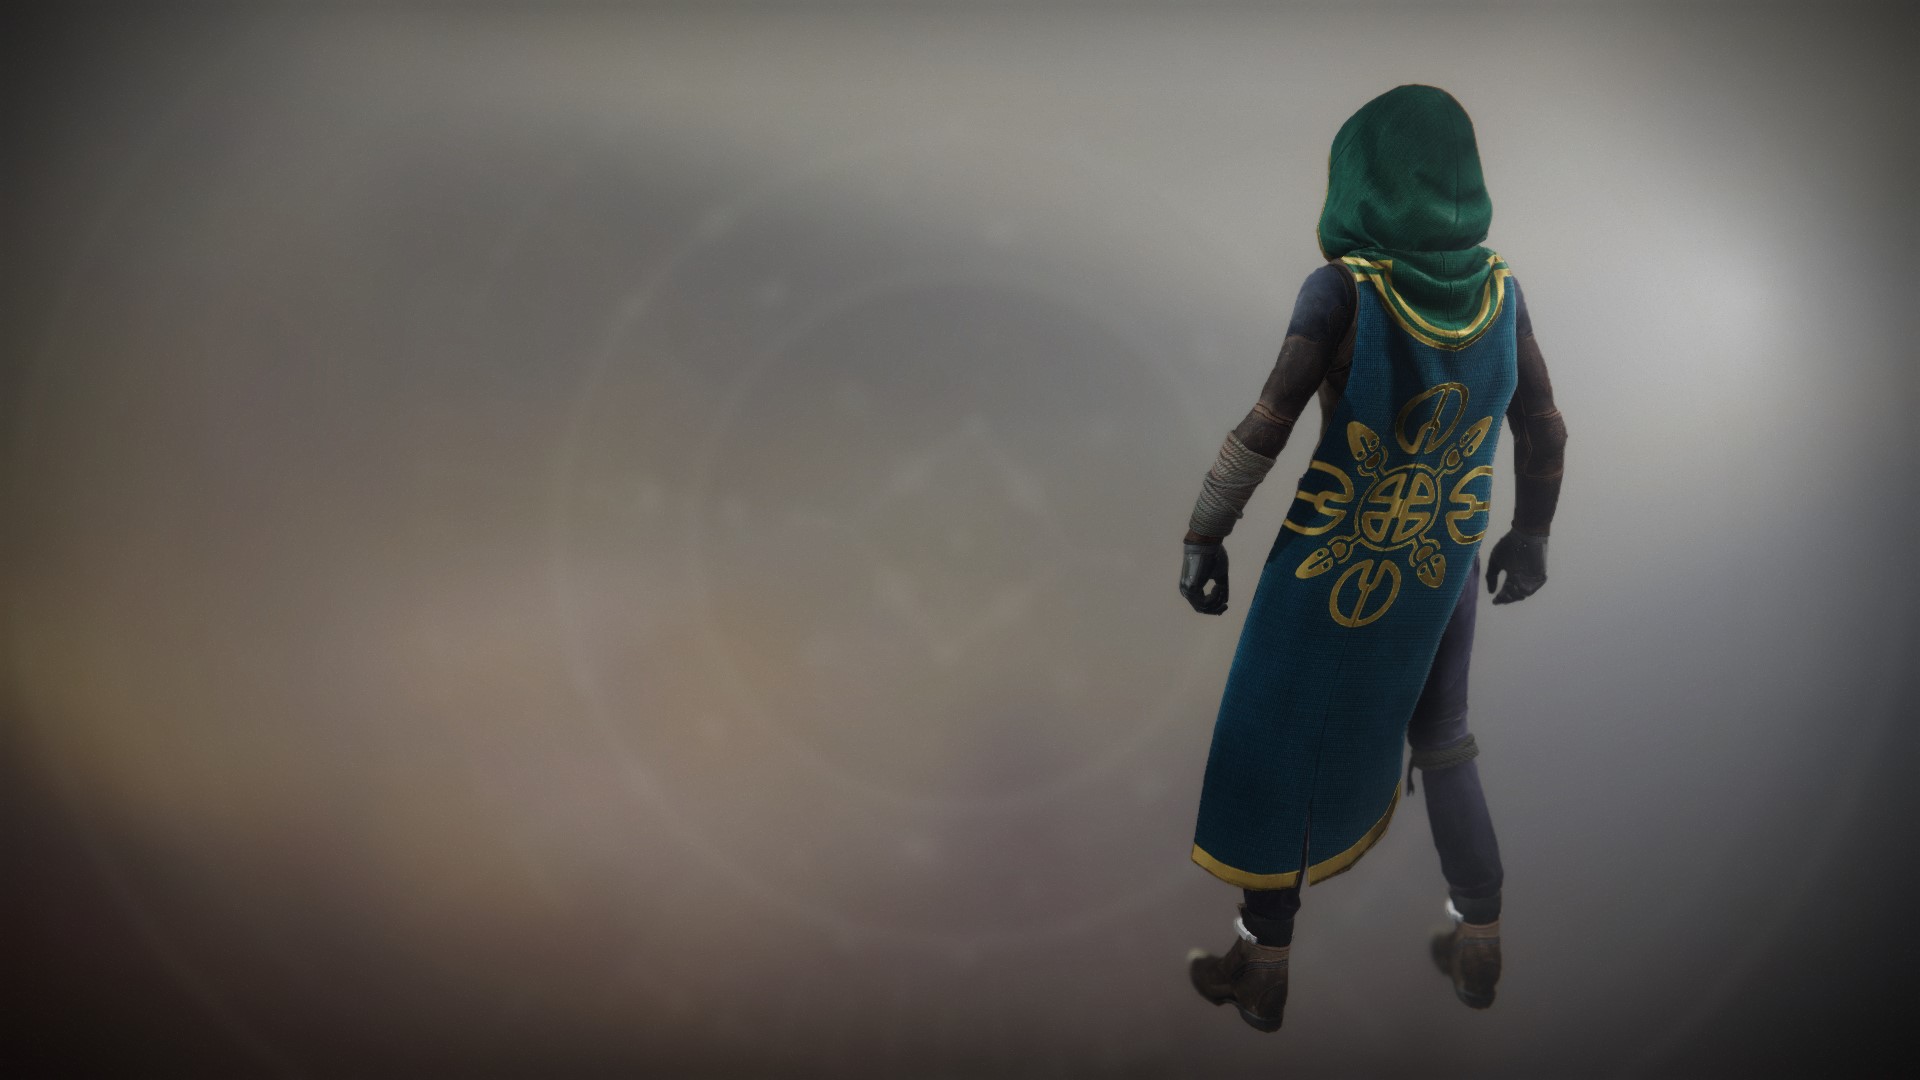 An in-game render of the Vernal Growth Cloak.